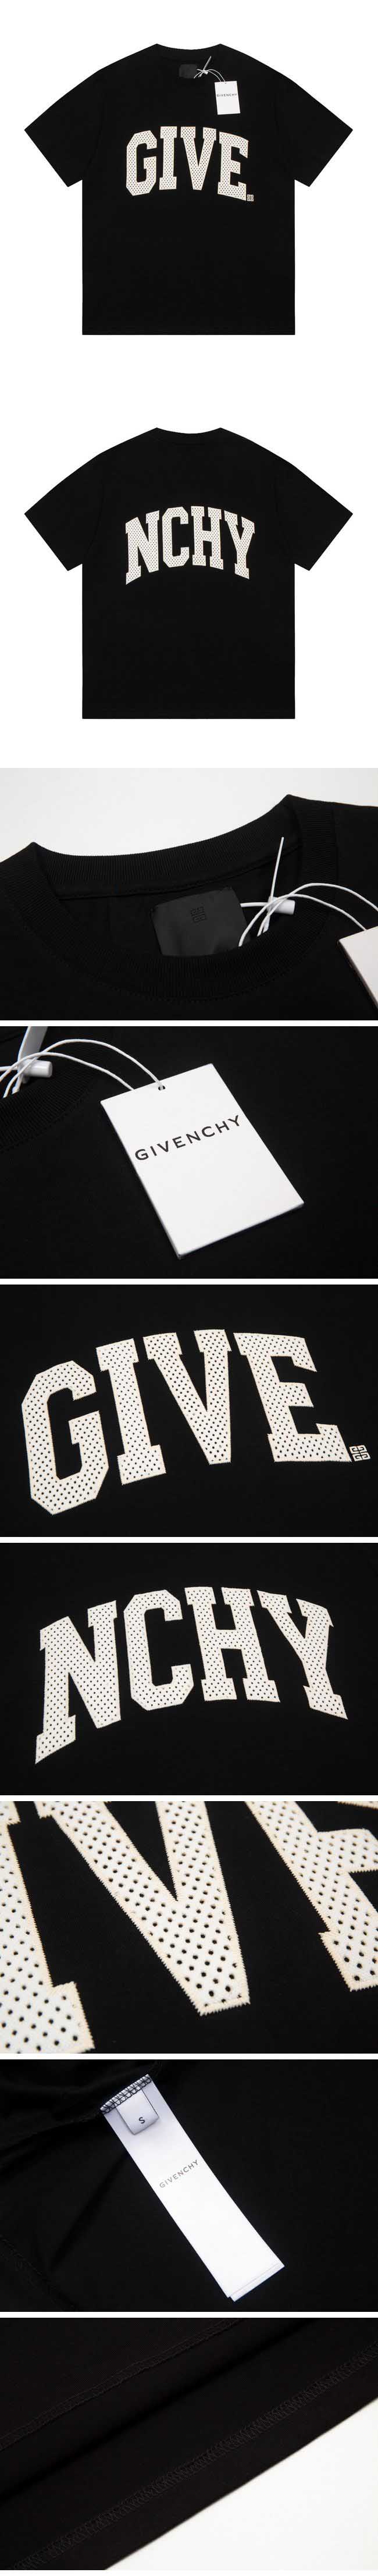 Givenchy Loose fit logo Tee ジバンシー ルーズ フィット ロゴ Tシャツ ブラック